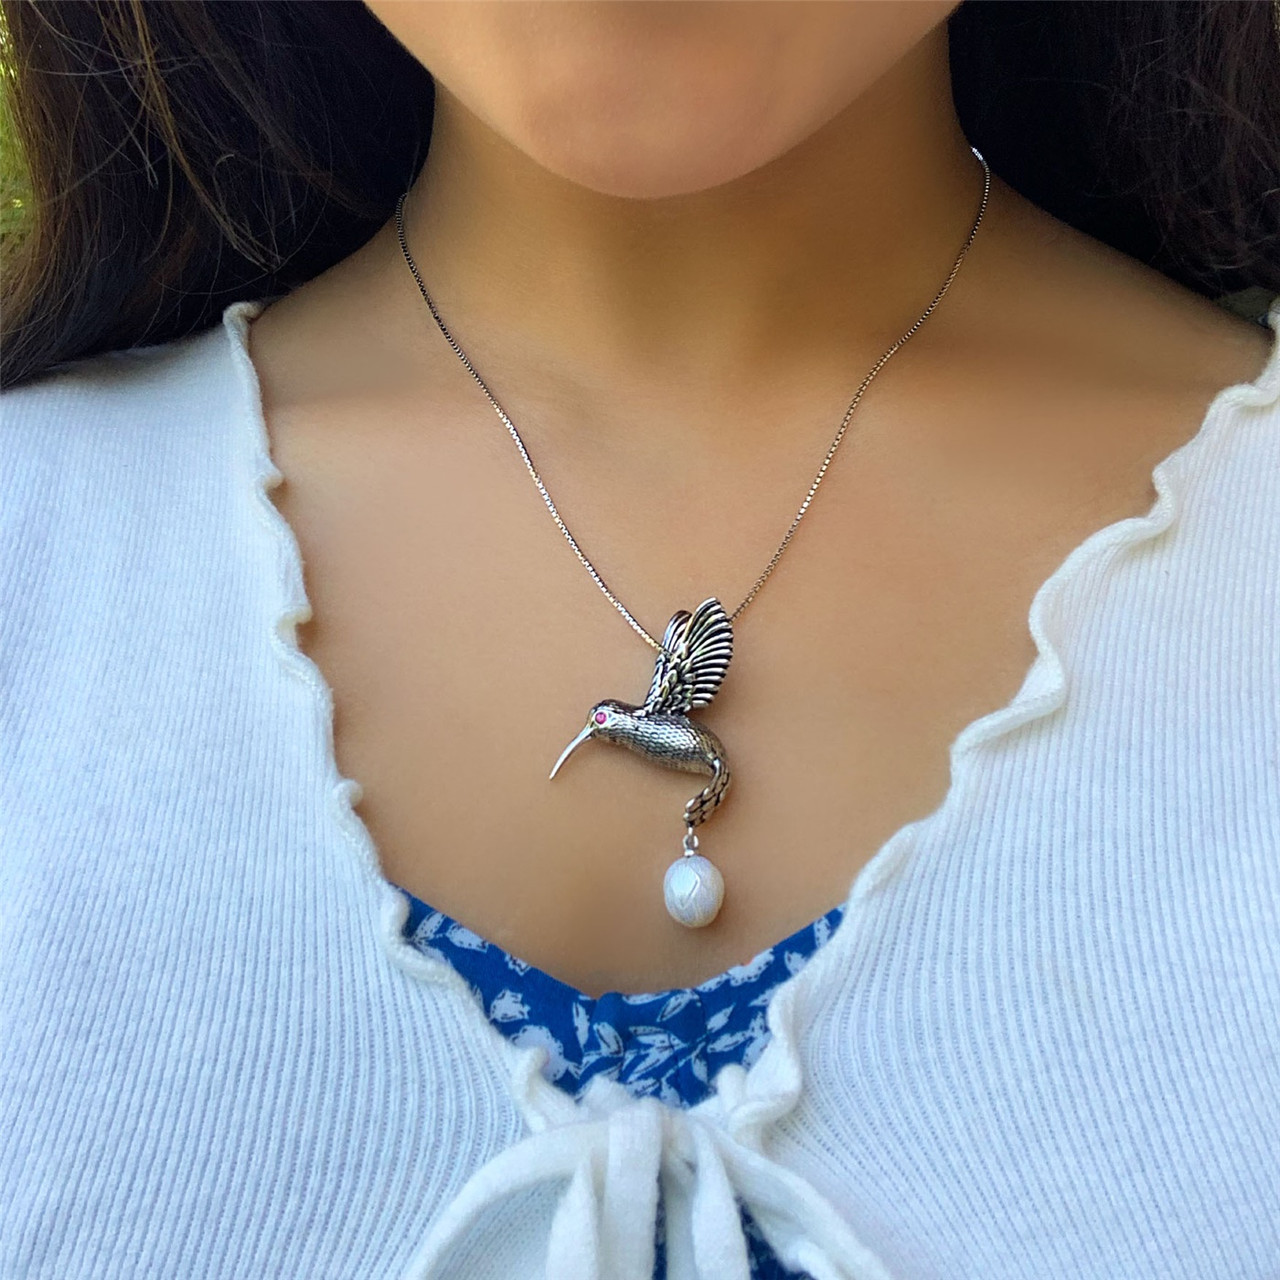 Beautiful Baby Bird Necklace - 17” Sterling Silver Necklace by Swoon! -  Bellaboo